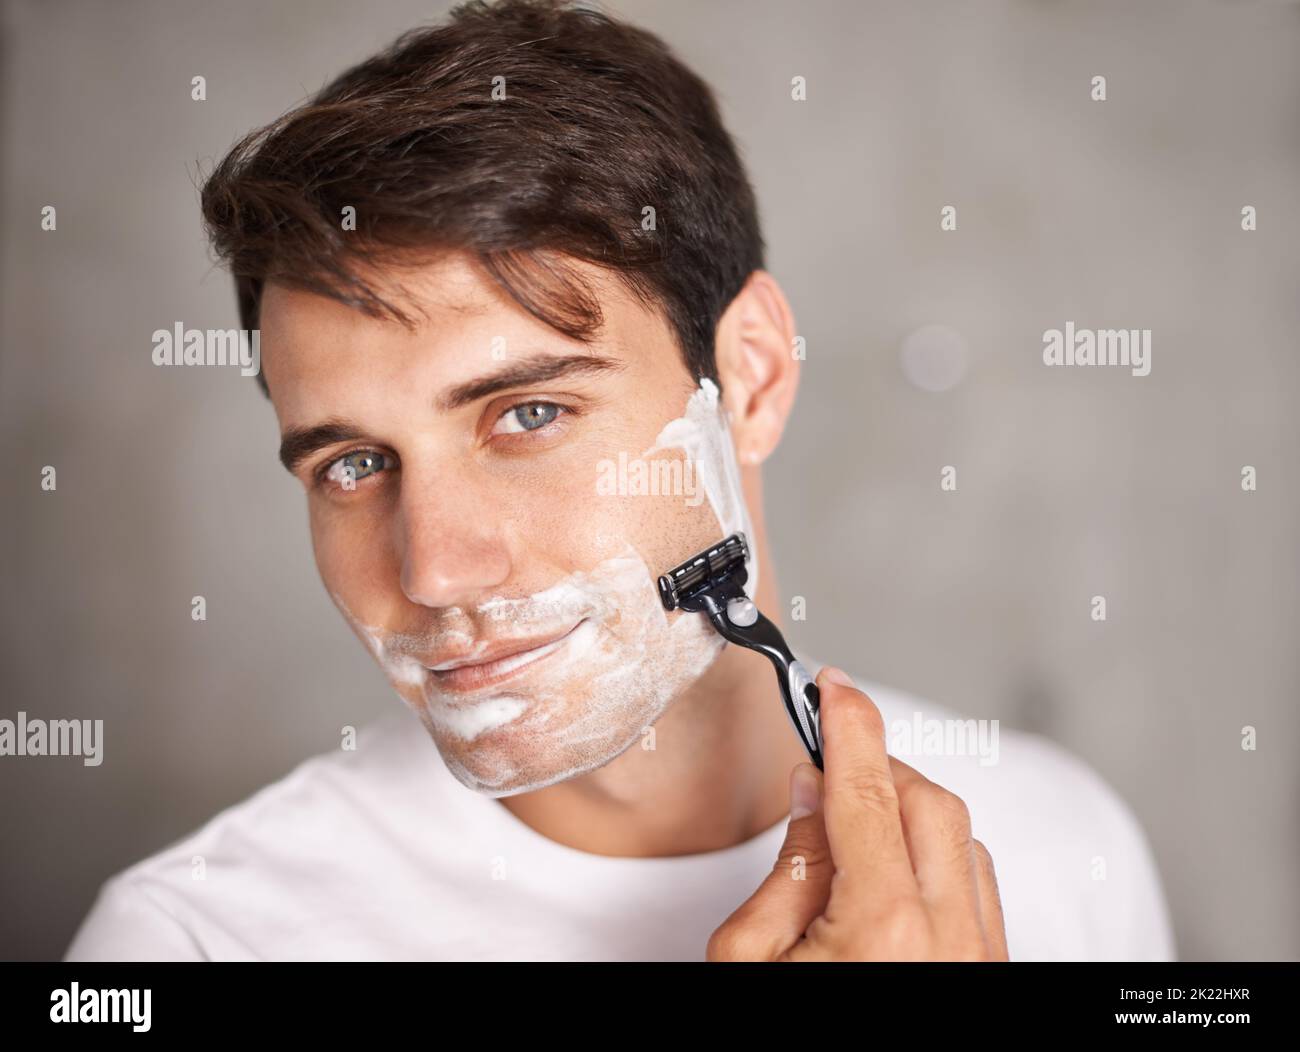 Cleaning up and looking great. Portrait shot of a handsome young man removing his facial hair. Stock Photo